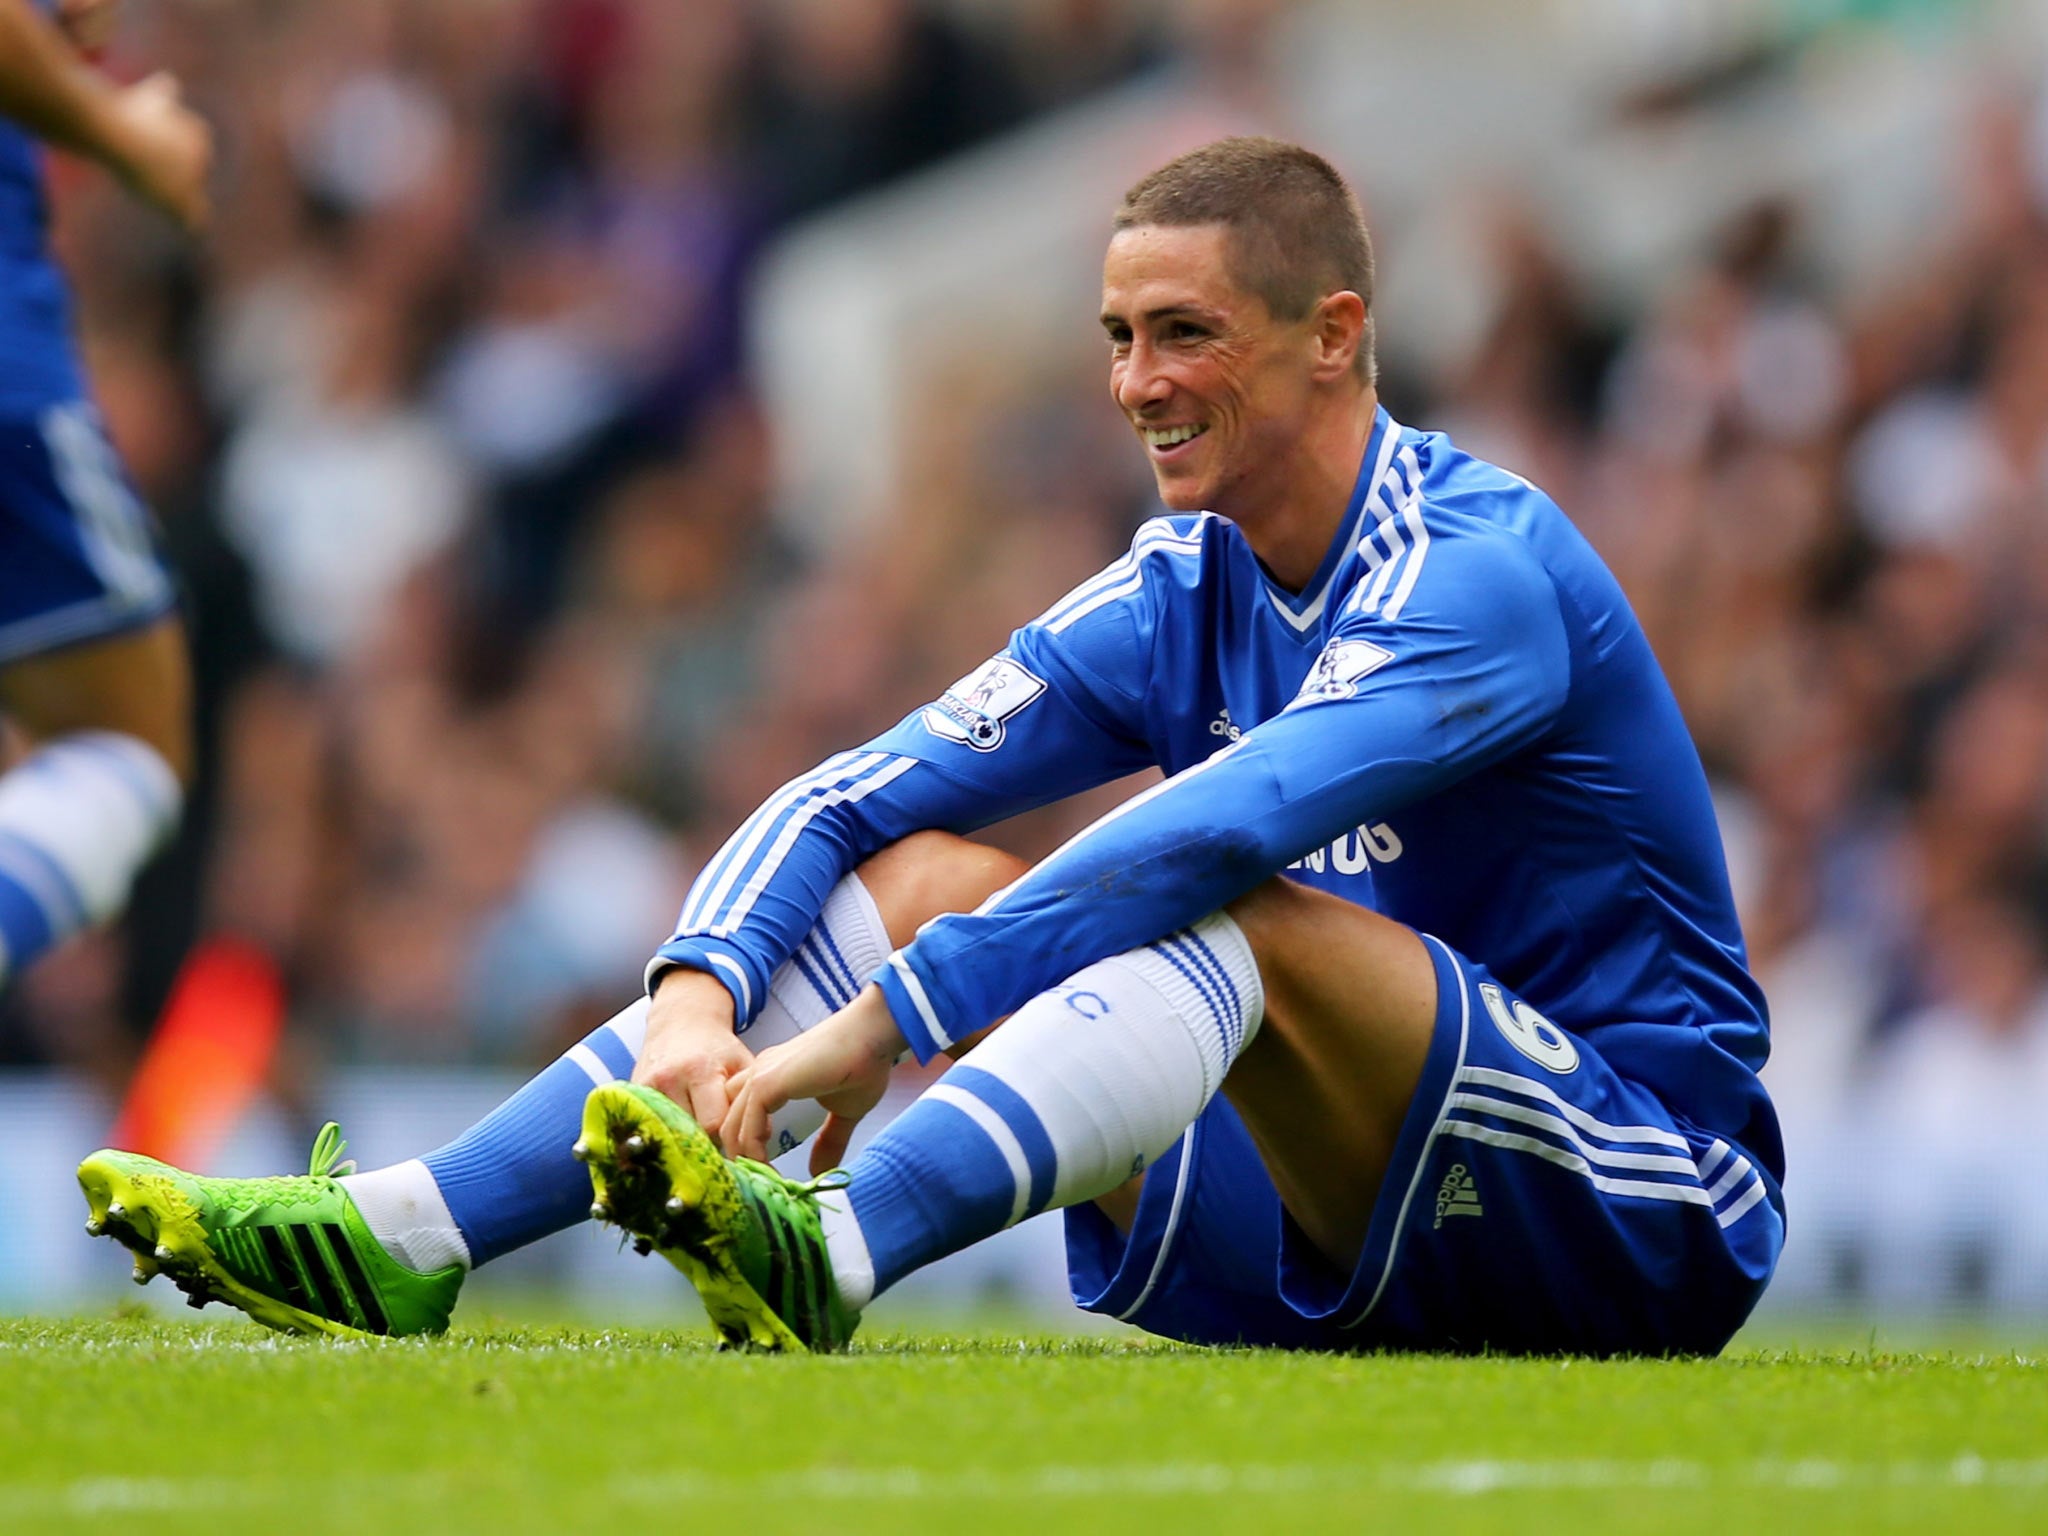 Chelsea striker Fernando Torres could be on his way out of the club